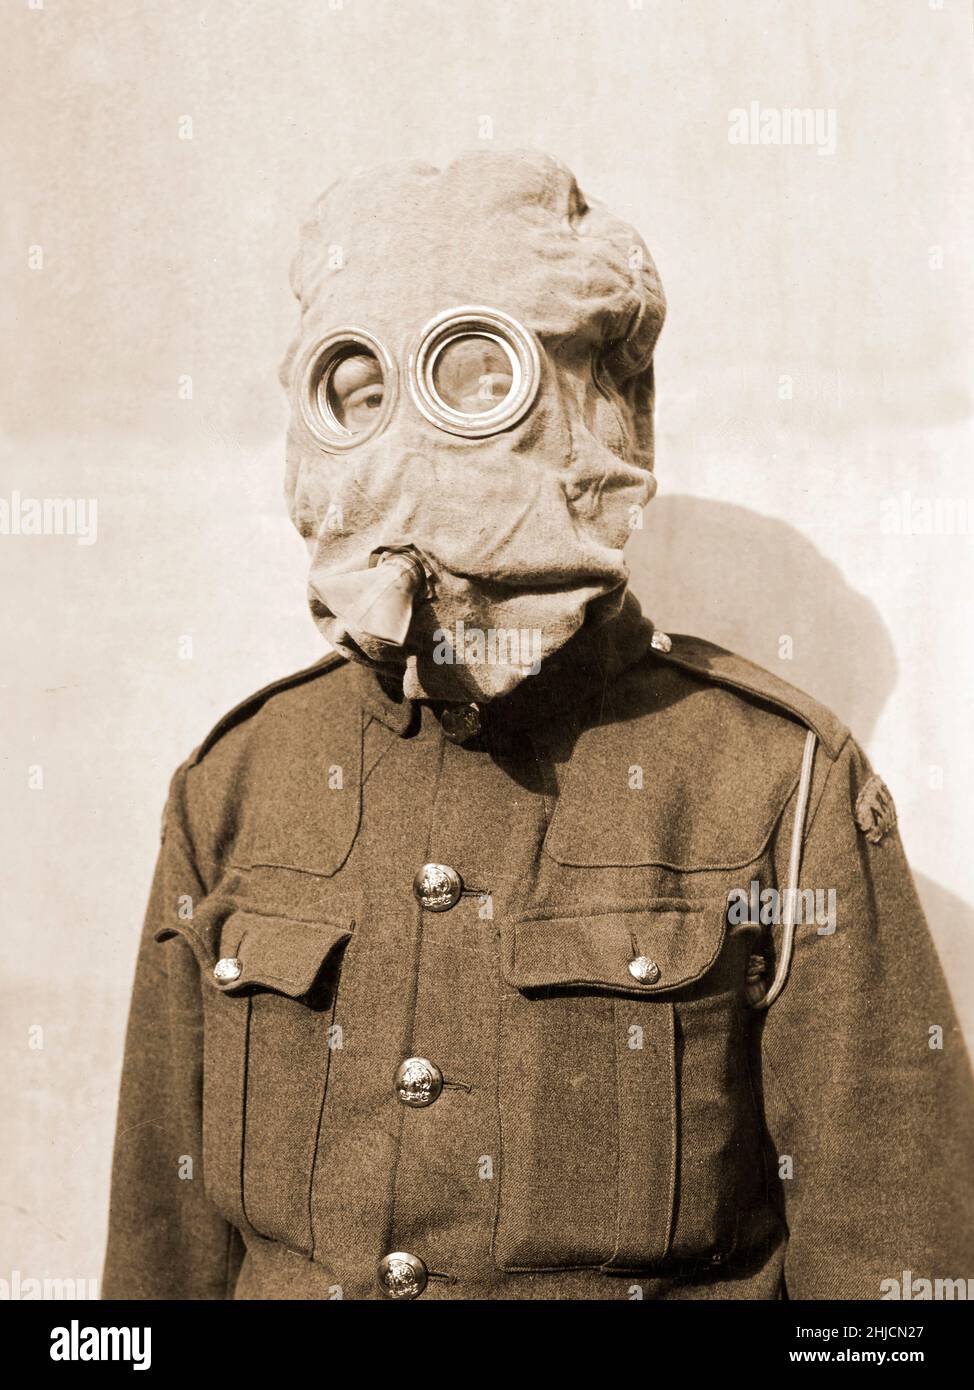 Gas mask from the First World War, 1918. Stock Photo